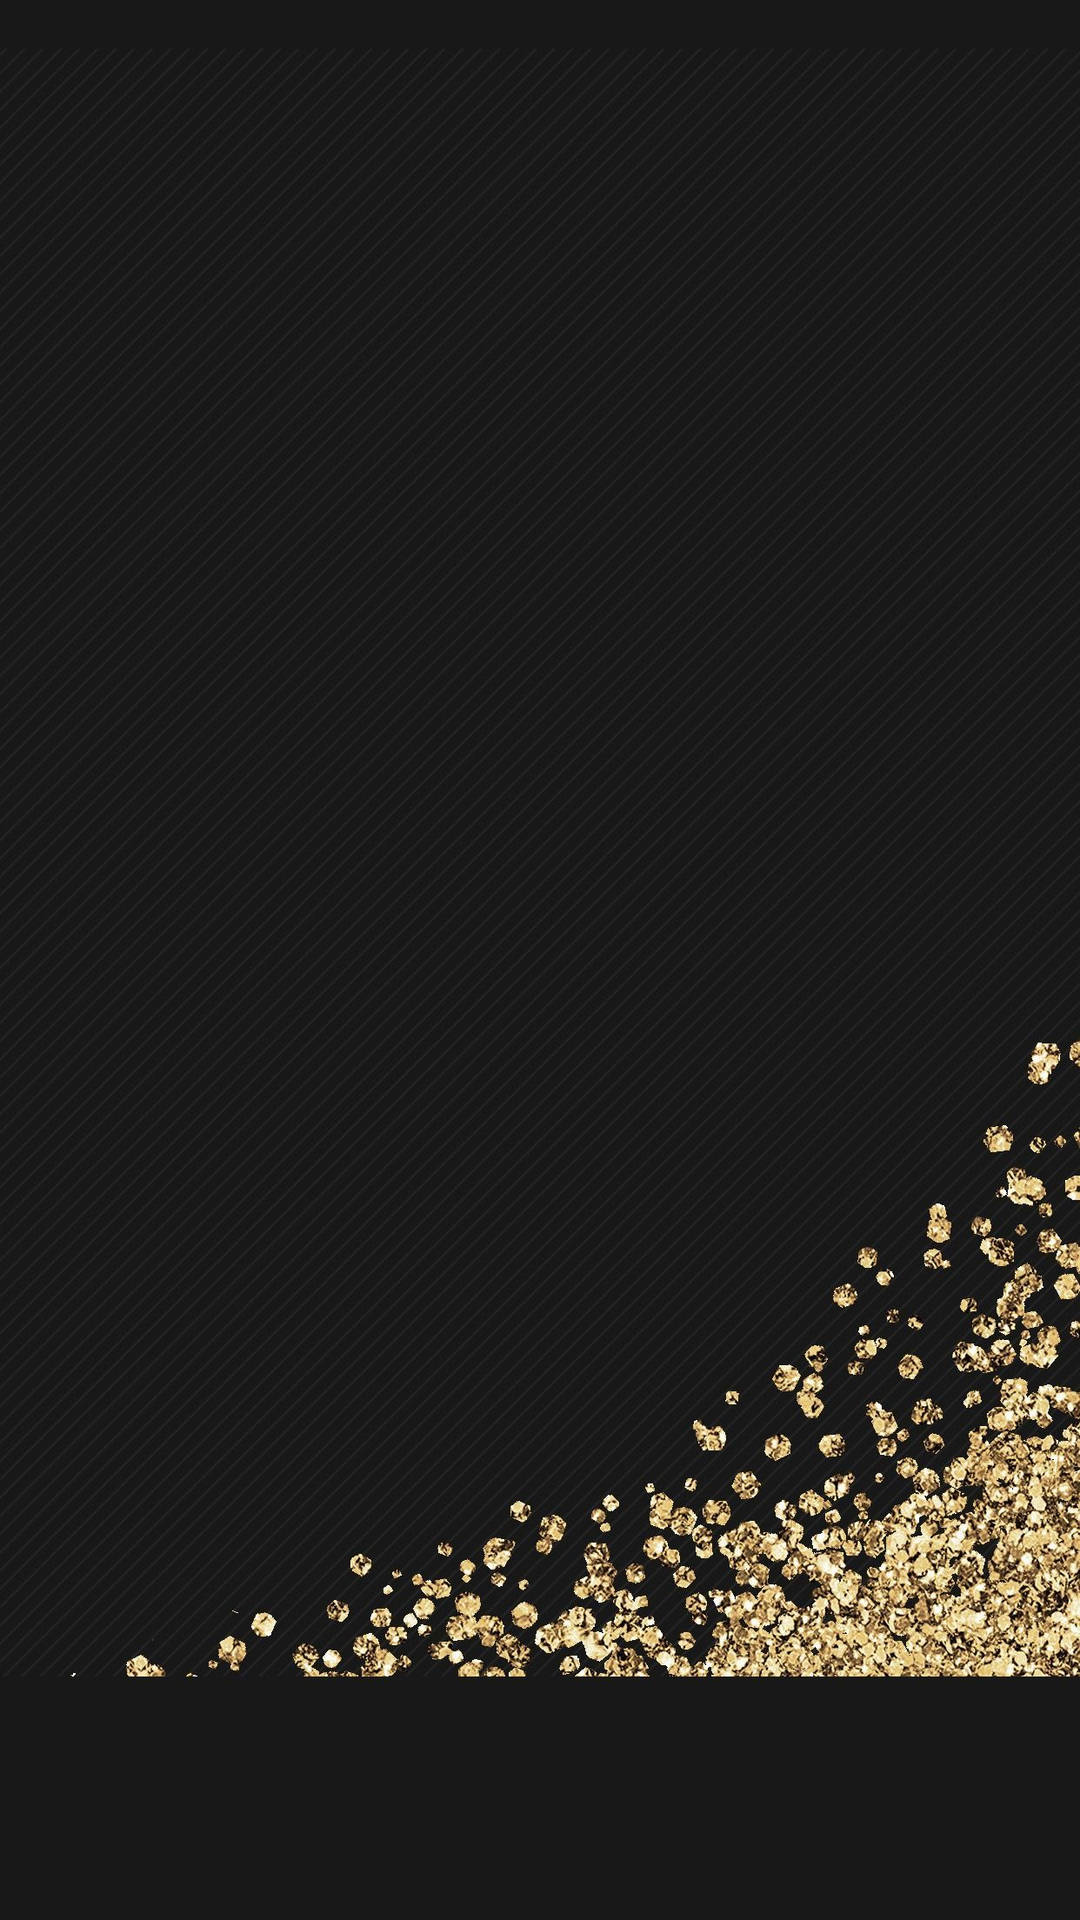 Dark Android Gold Crystal Background